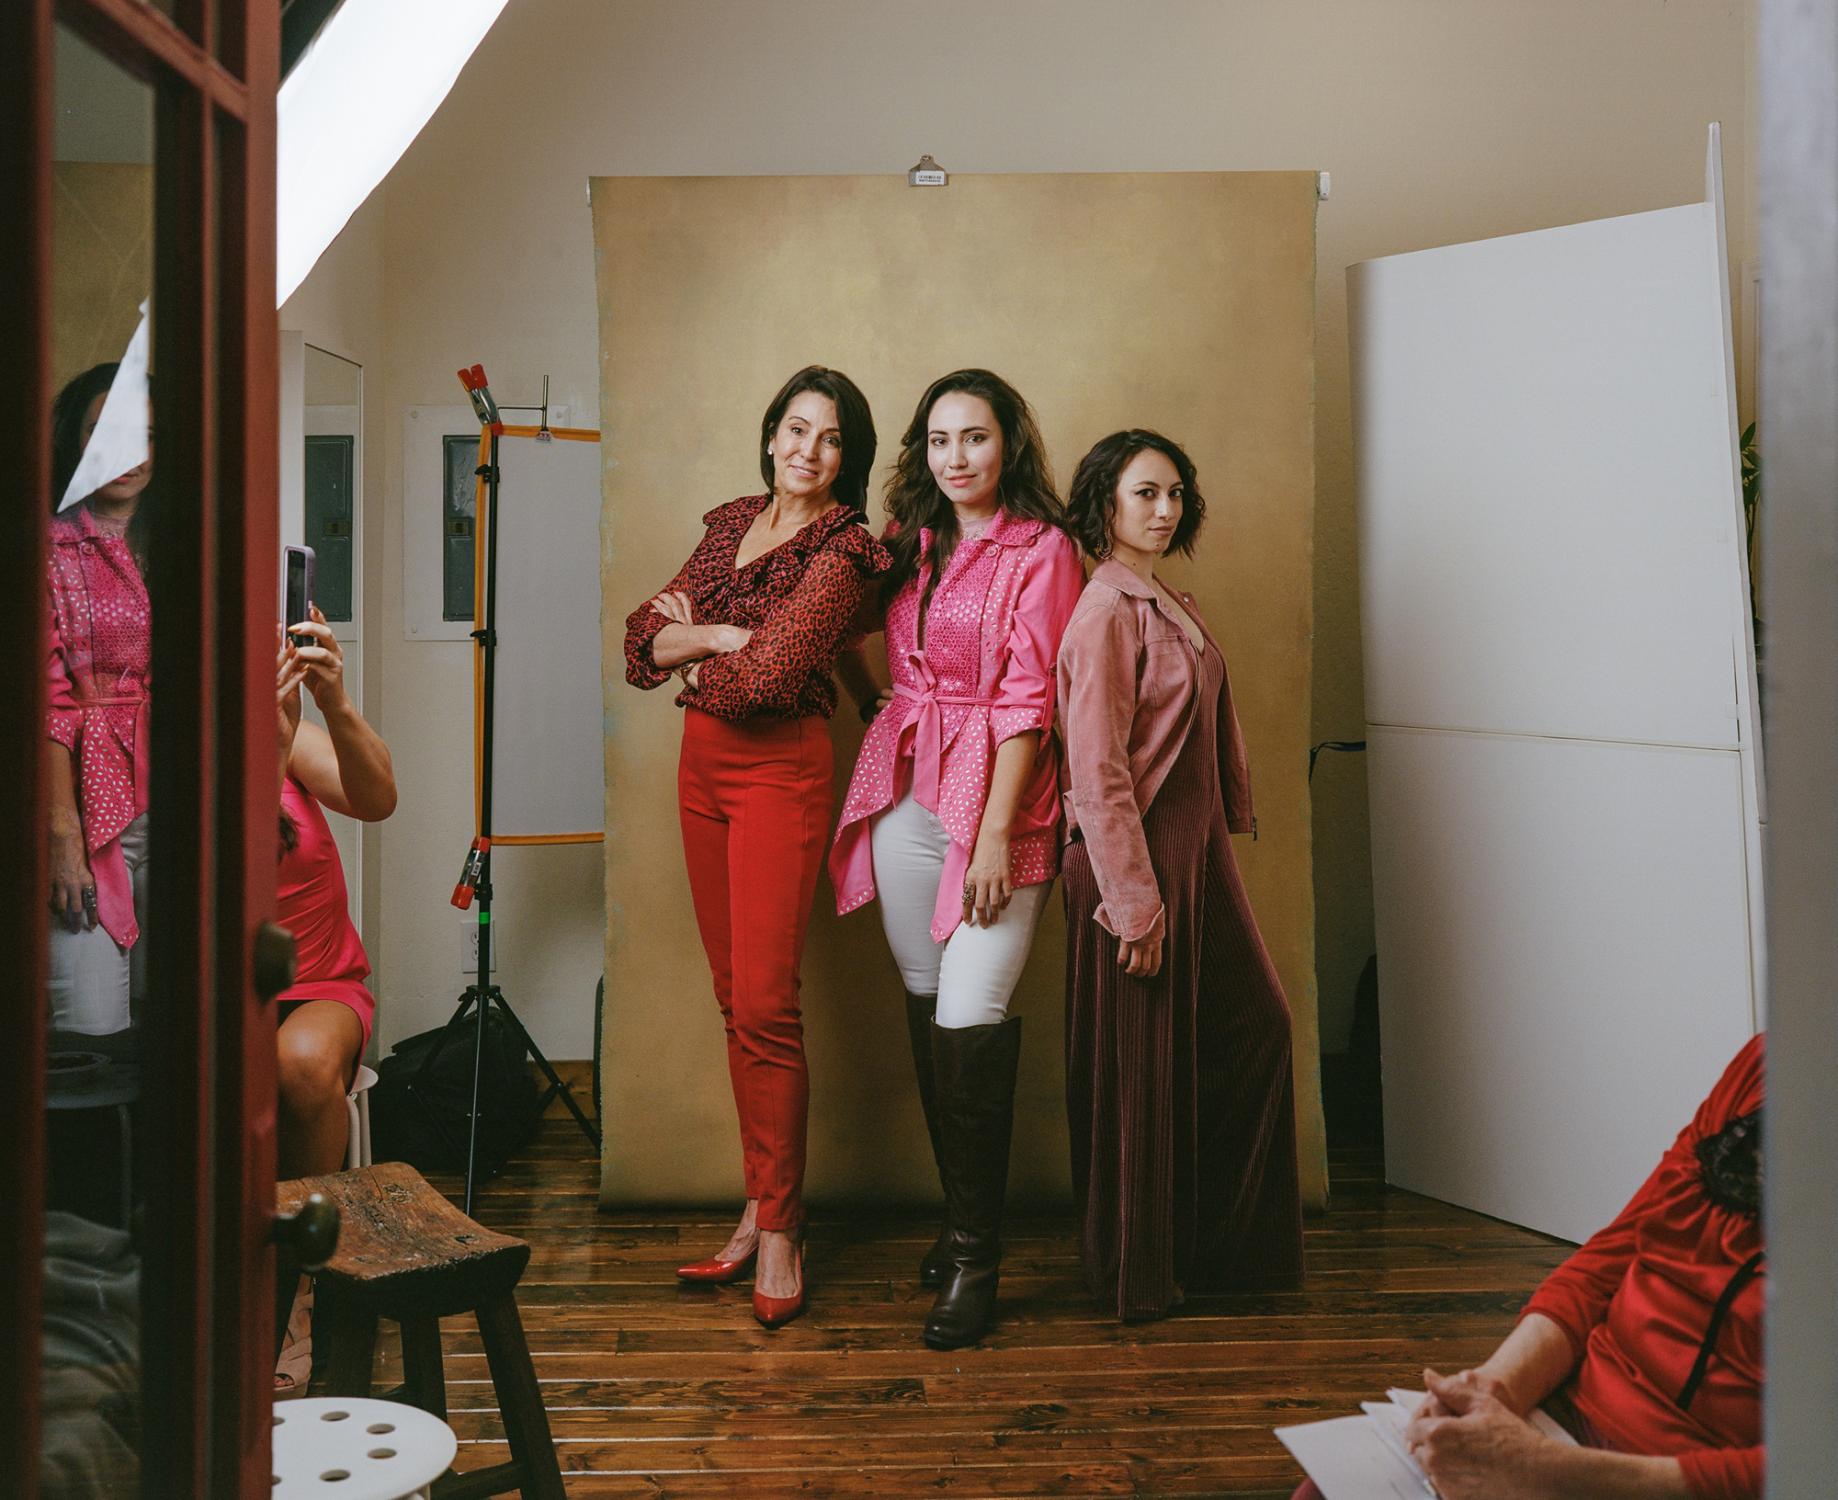 BTS image during a promo photoshoot for The Vagina Monologues Alameda. Seen here from left to right are Germaine Gaudet, Aya Hoja, and Natalie Cutler.